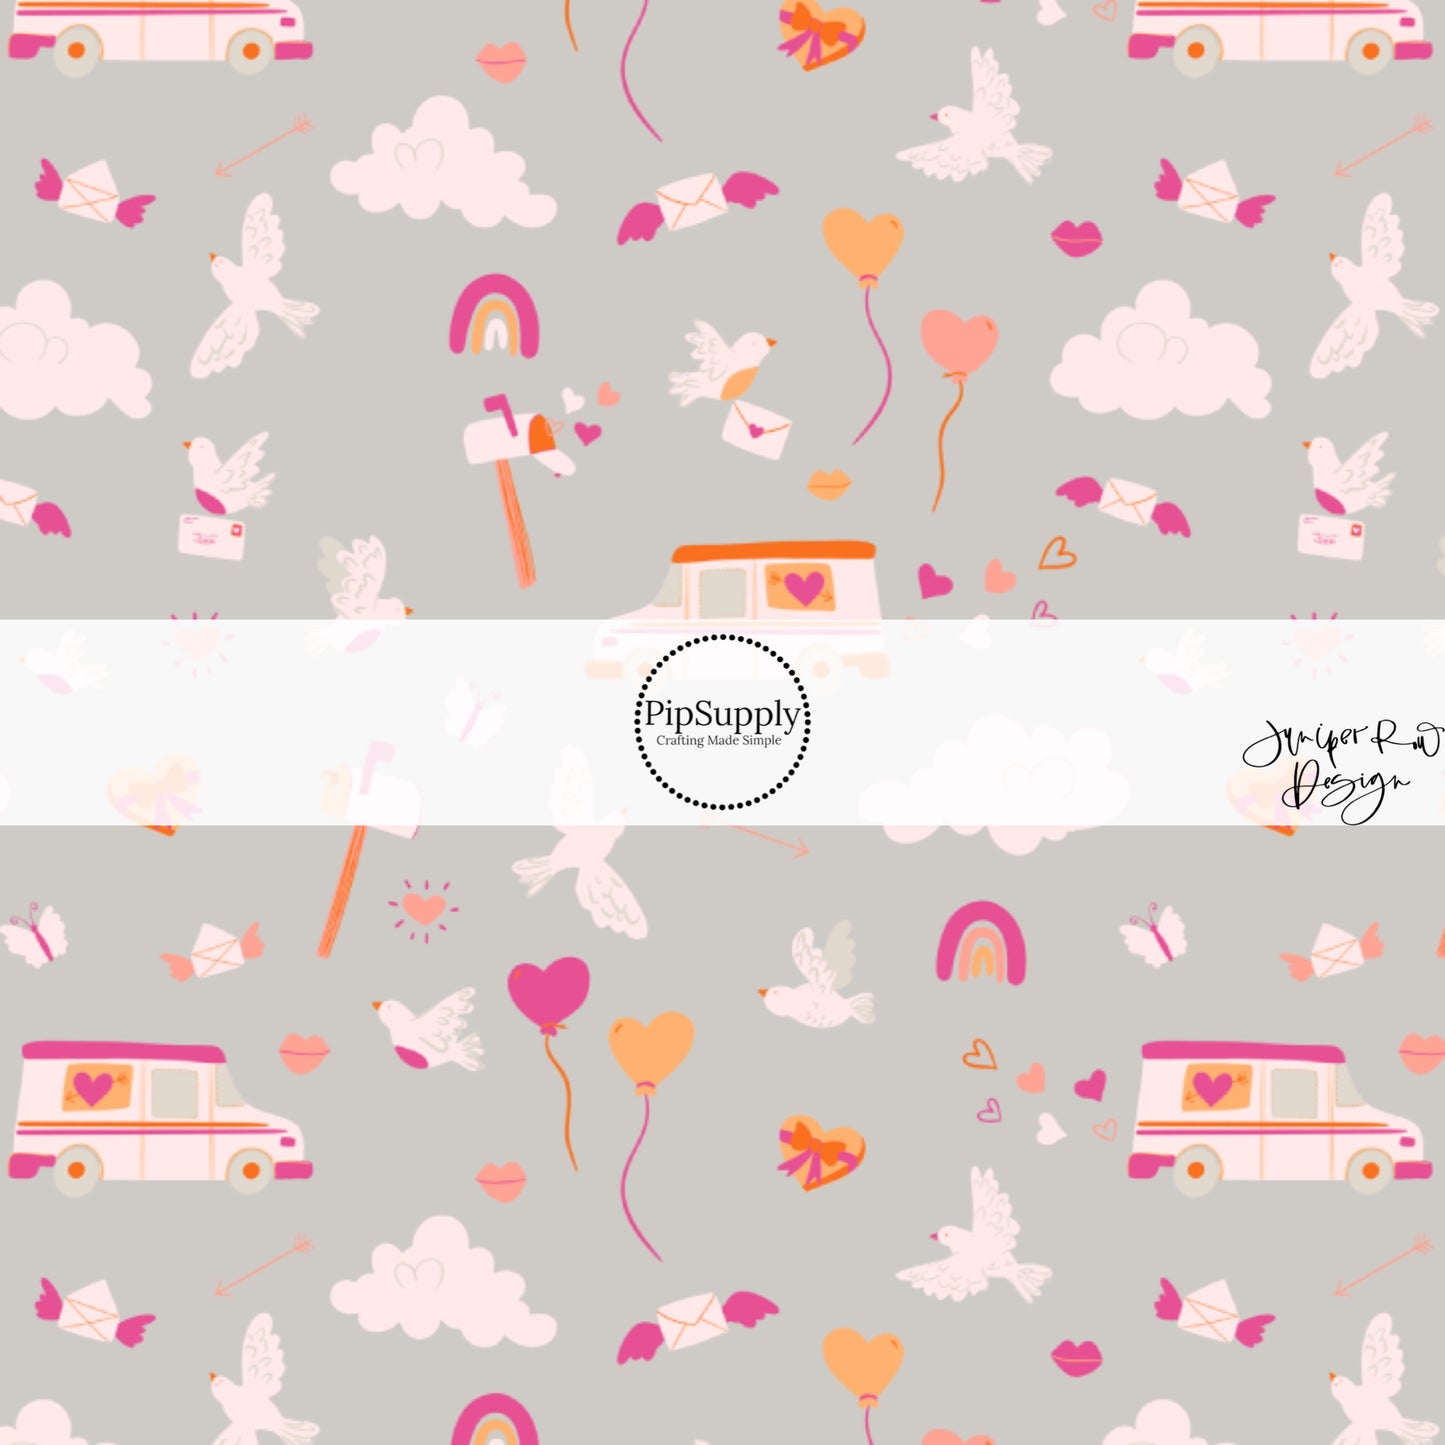 These Valentine's pattern themed fabric by the yard features heart shaped balloons, clouds, rainbows, and birds. This fun Valentine's Day fabric can be used for all your sewing and crafting needs! 